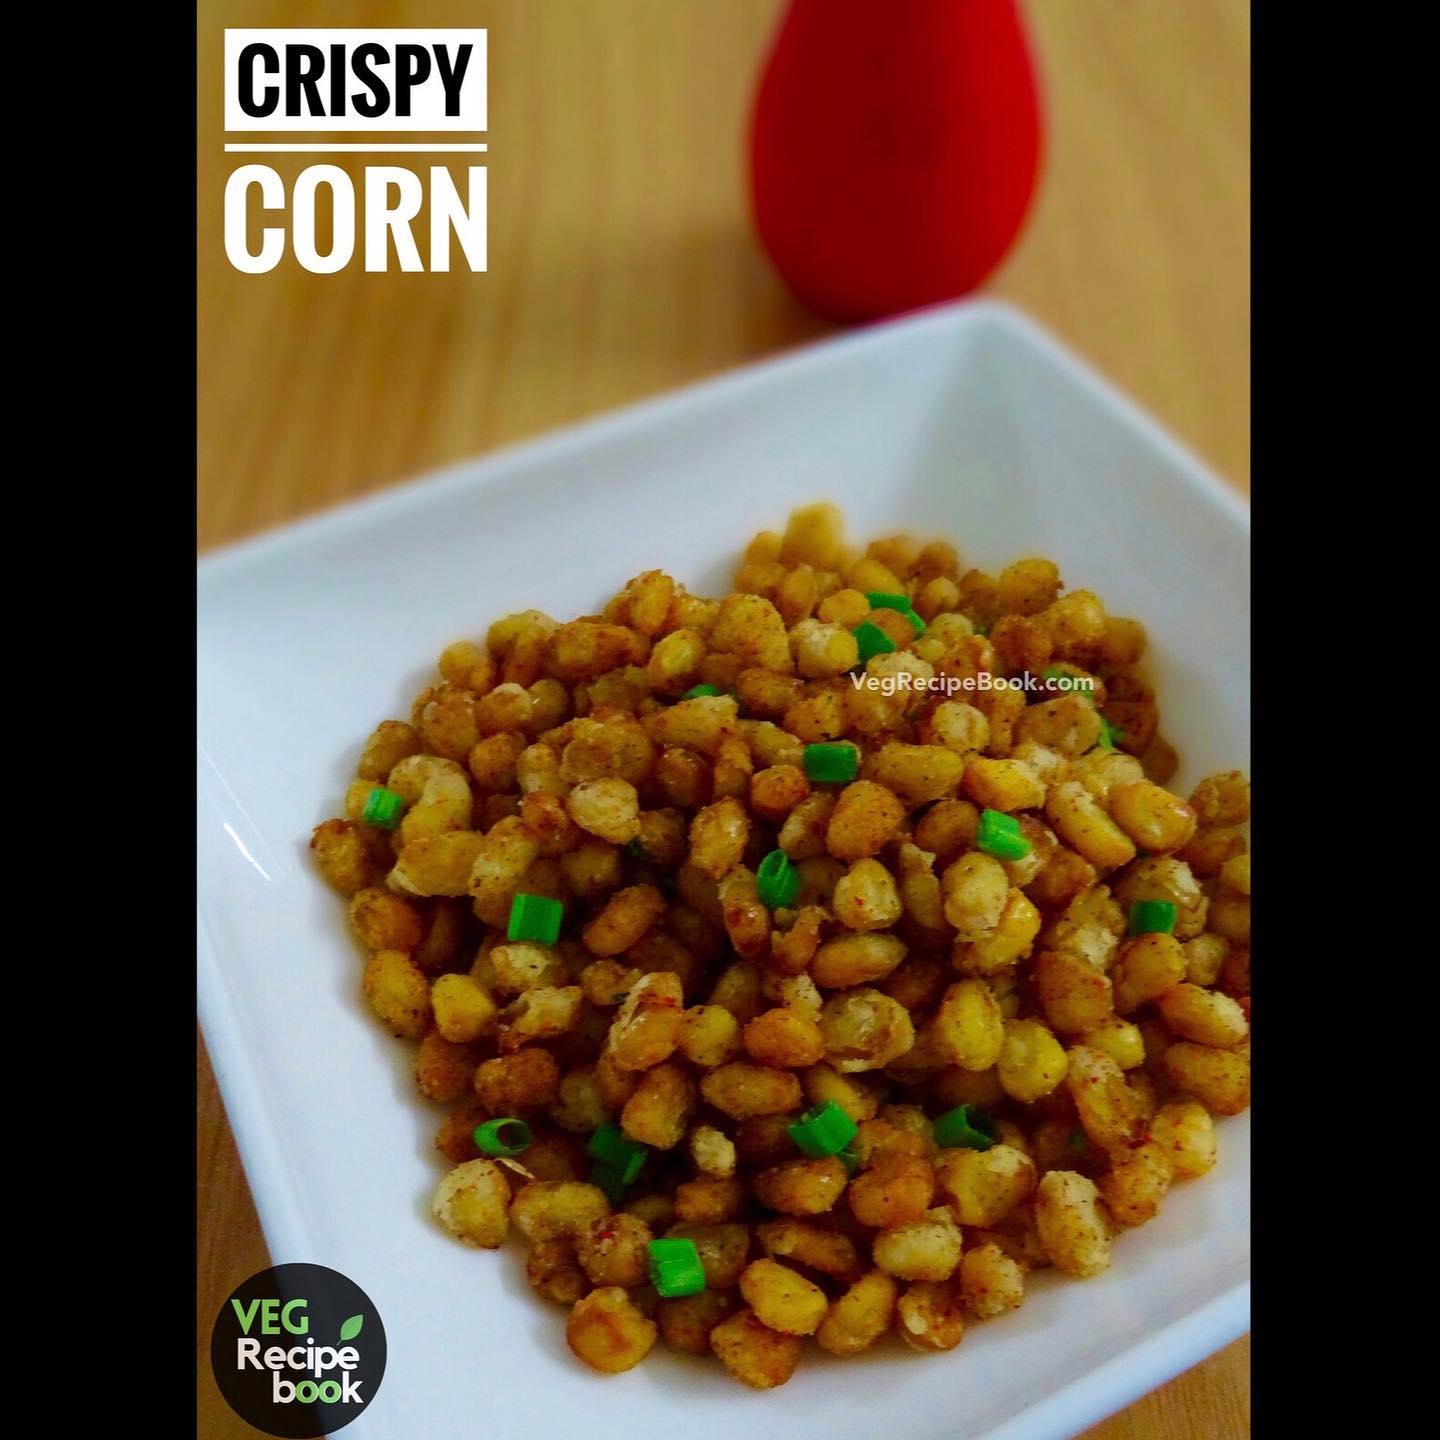 The forever favorite CRISPY CORN ~ Crunchy munching Snack 🌽 
I know it’s corny but it’s A-maize-ing 😜🌾 
.
.
.
.
.
Follow me @thevegrecipebook for more amazing Food Photography & Recipes. 
.
.
.
.
.
#crispycorn #corn #crispycorns #snacks #snack #starter #starters #makai #garuskitchen #itsmegrd #vegrecipebook #food #foodphotography #foodporn #foodstagram #foodblogger #vegan #vegetarianrecipes #vegetarian #makki #snackideas #photooftheday #photography #organic #instagood #instafood #foodinstagram #foodphotographer #homechef #madewithlove